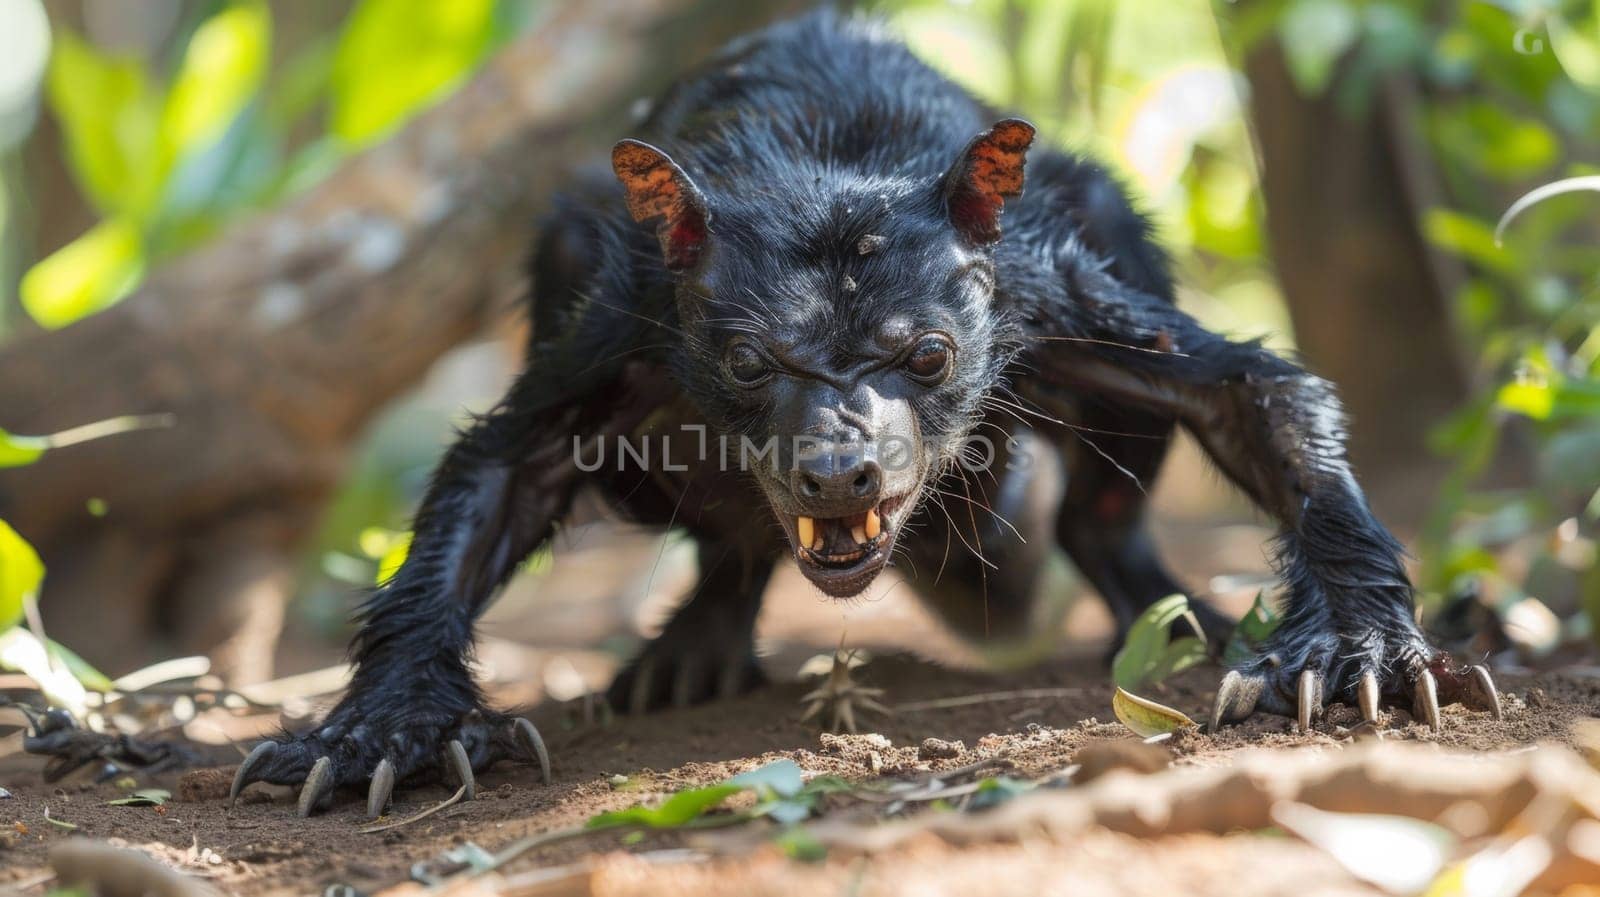 A black animal with large teeth and claws on the ground, AI by starush